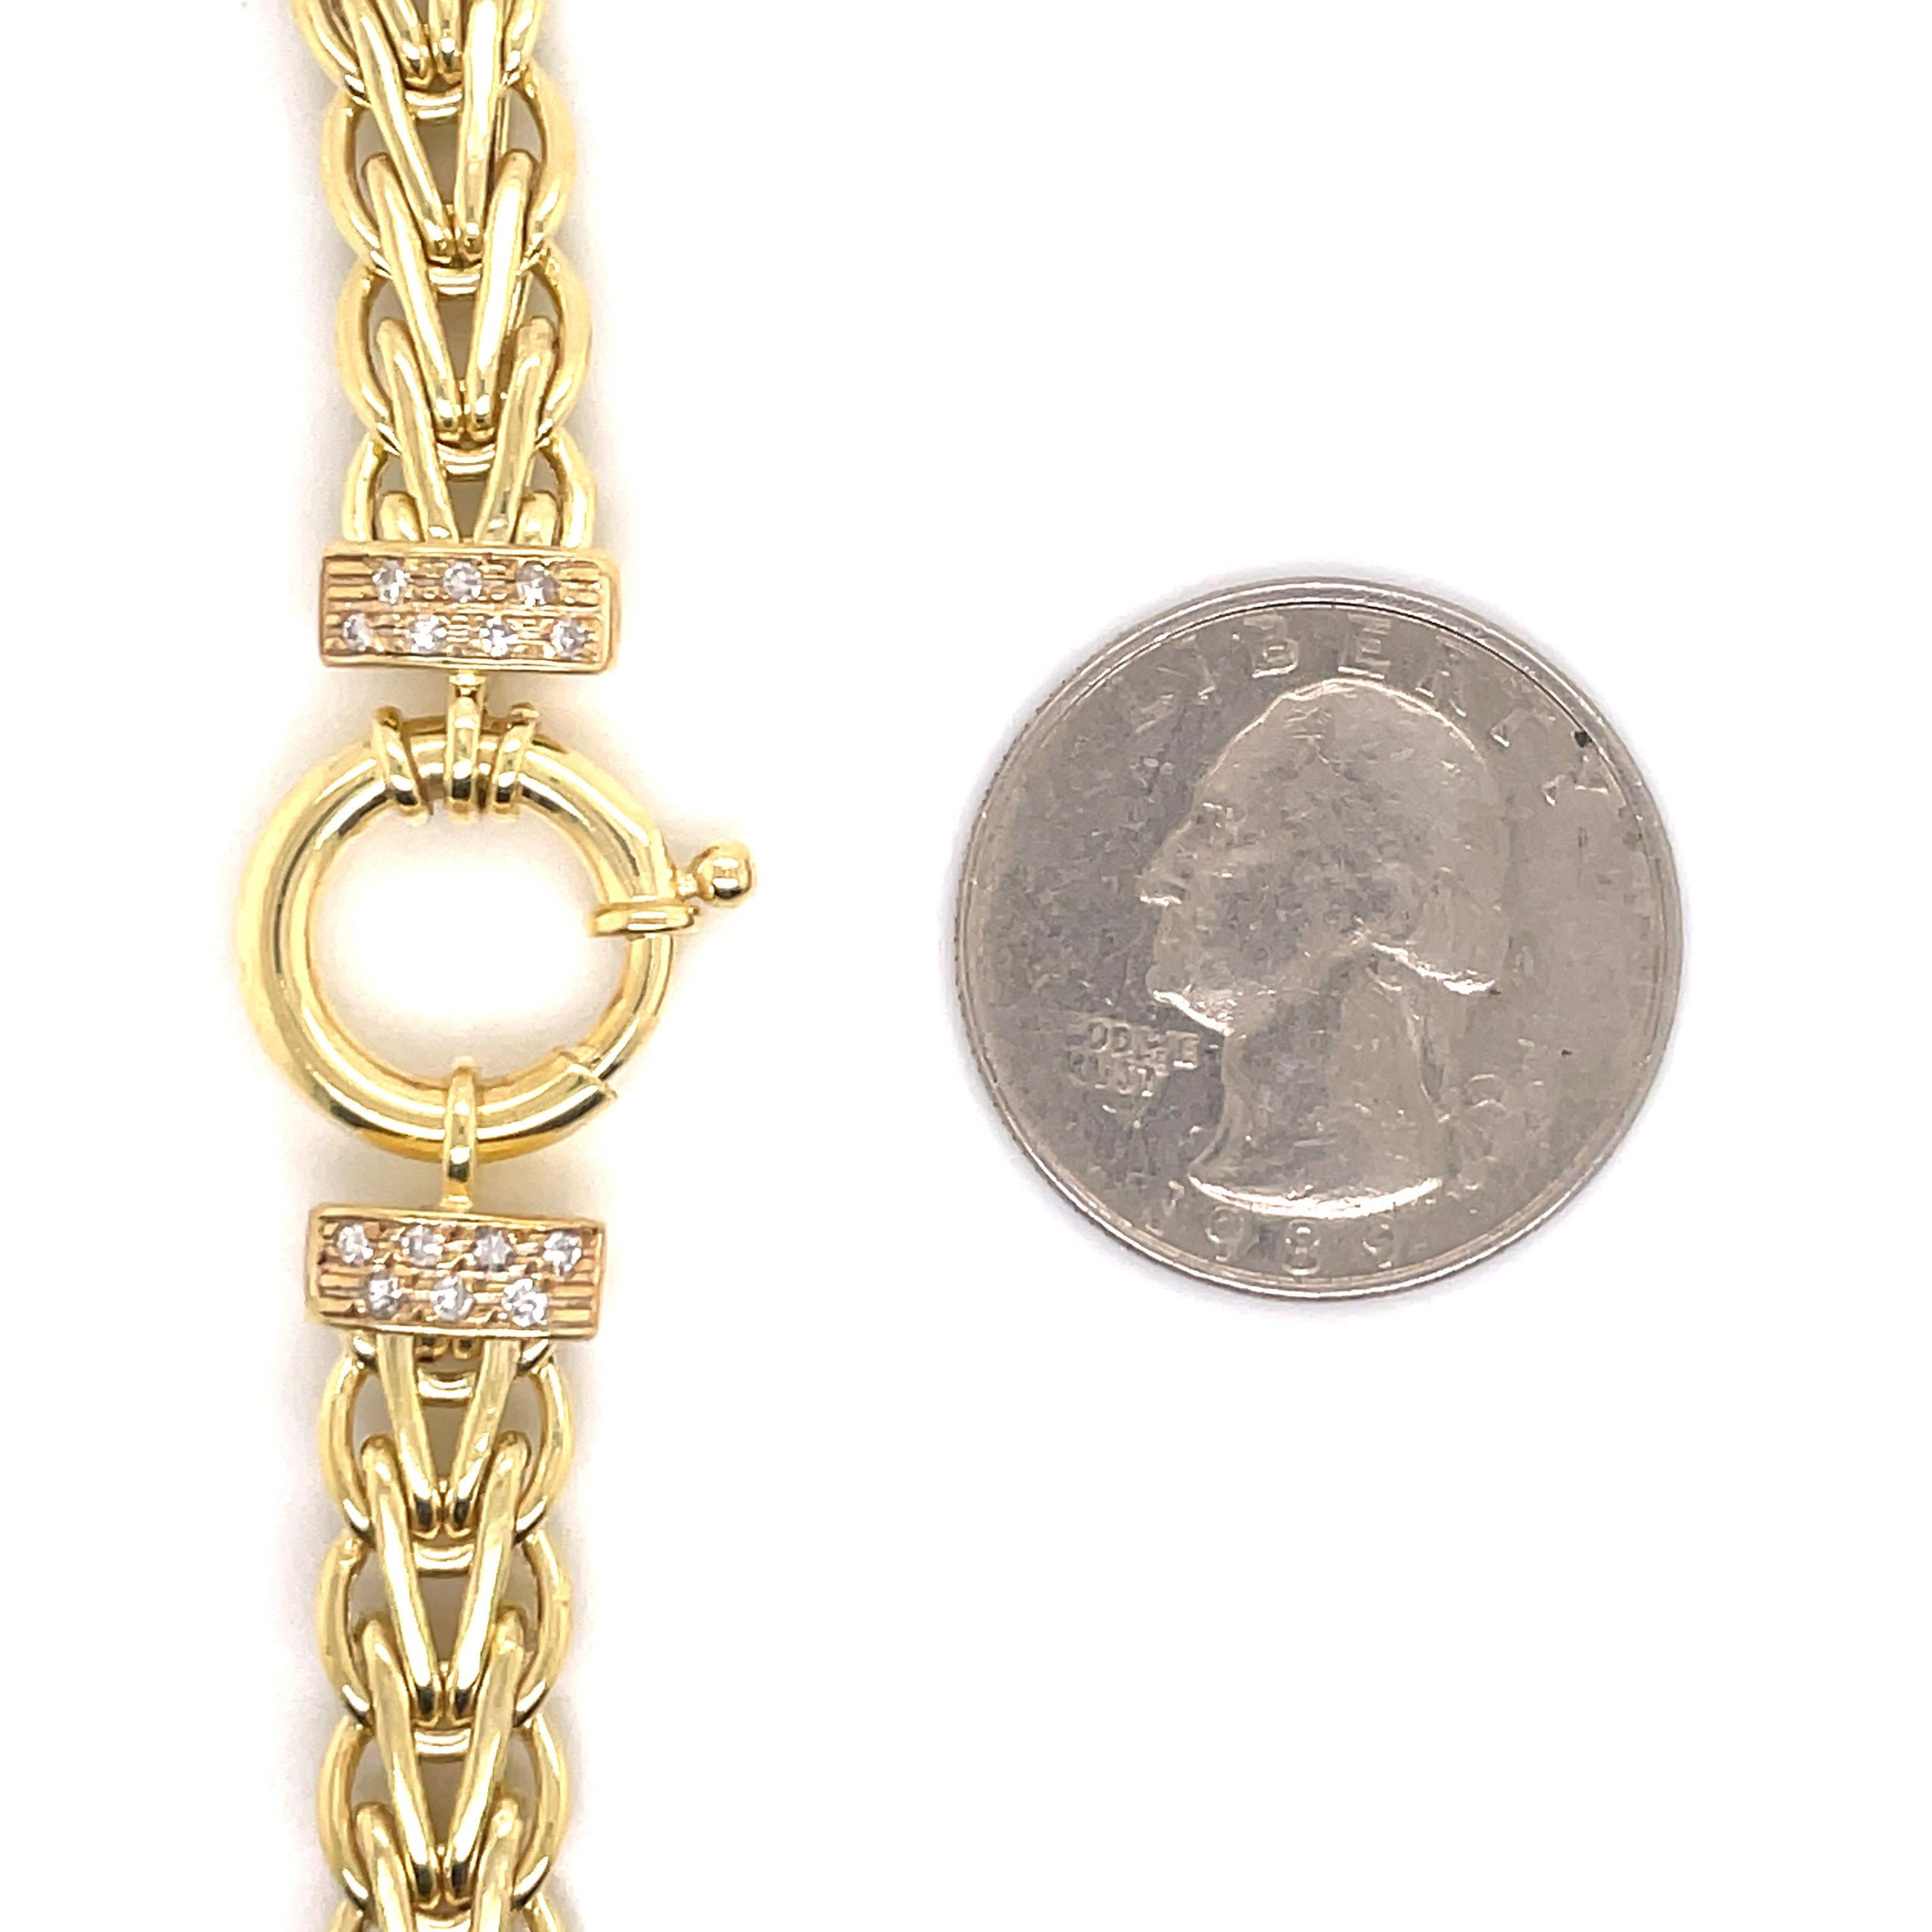 14 Karat Yellow Gold necklace featuring aa Byzantine motif weighing 21 grams.
Made in Turkey 